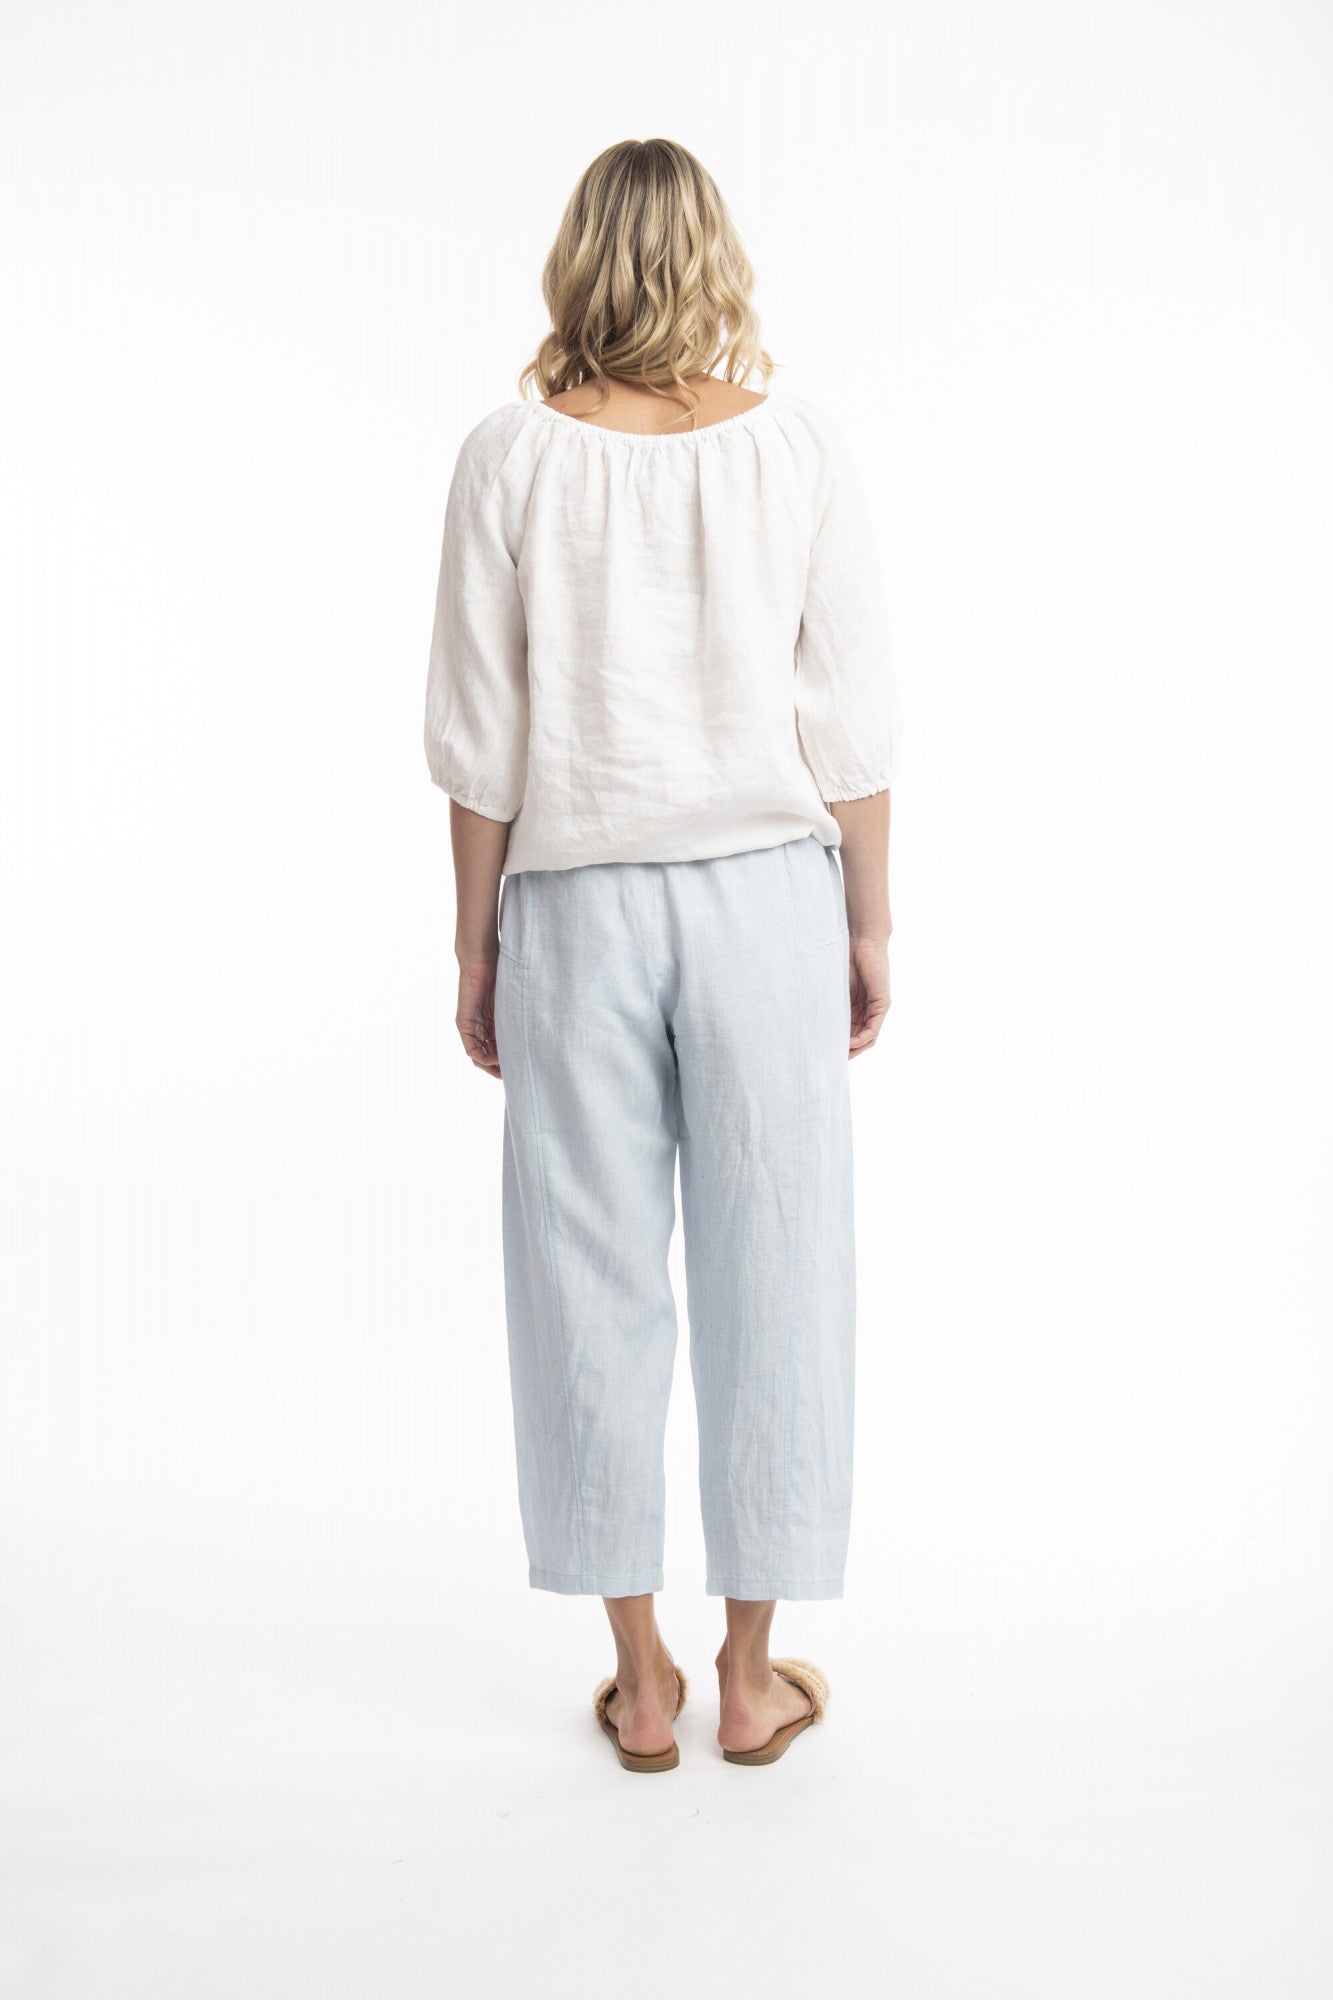 Orientique - Linen Pocket Pant - all things being eco chilliwack canada - women's clothing and accessories boutique